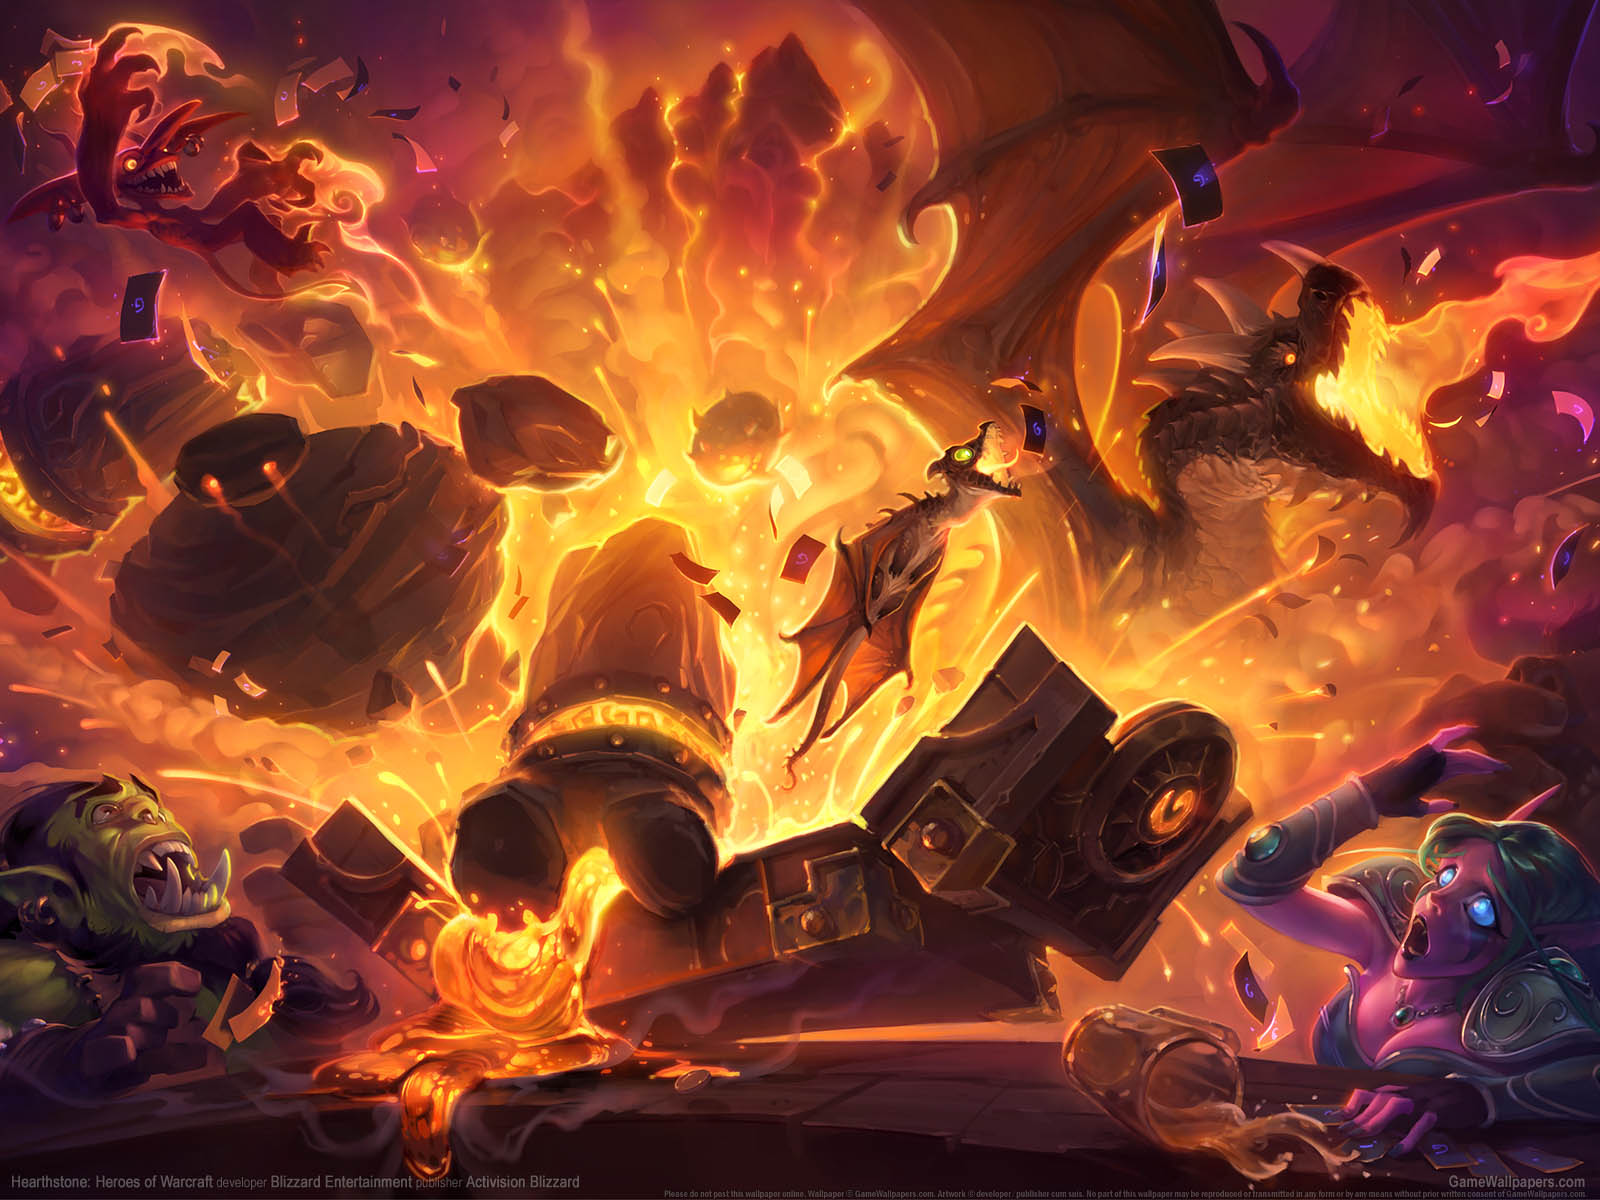 Hearthstone%3A Heroes of Warcraft wallpaper 11 1600x1200